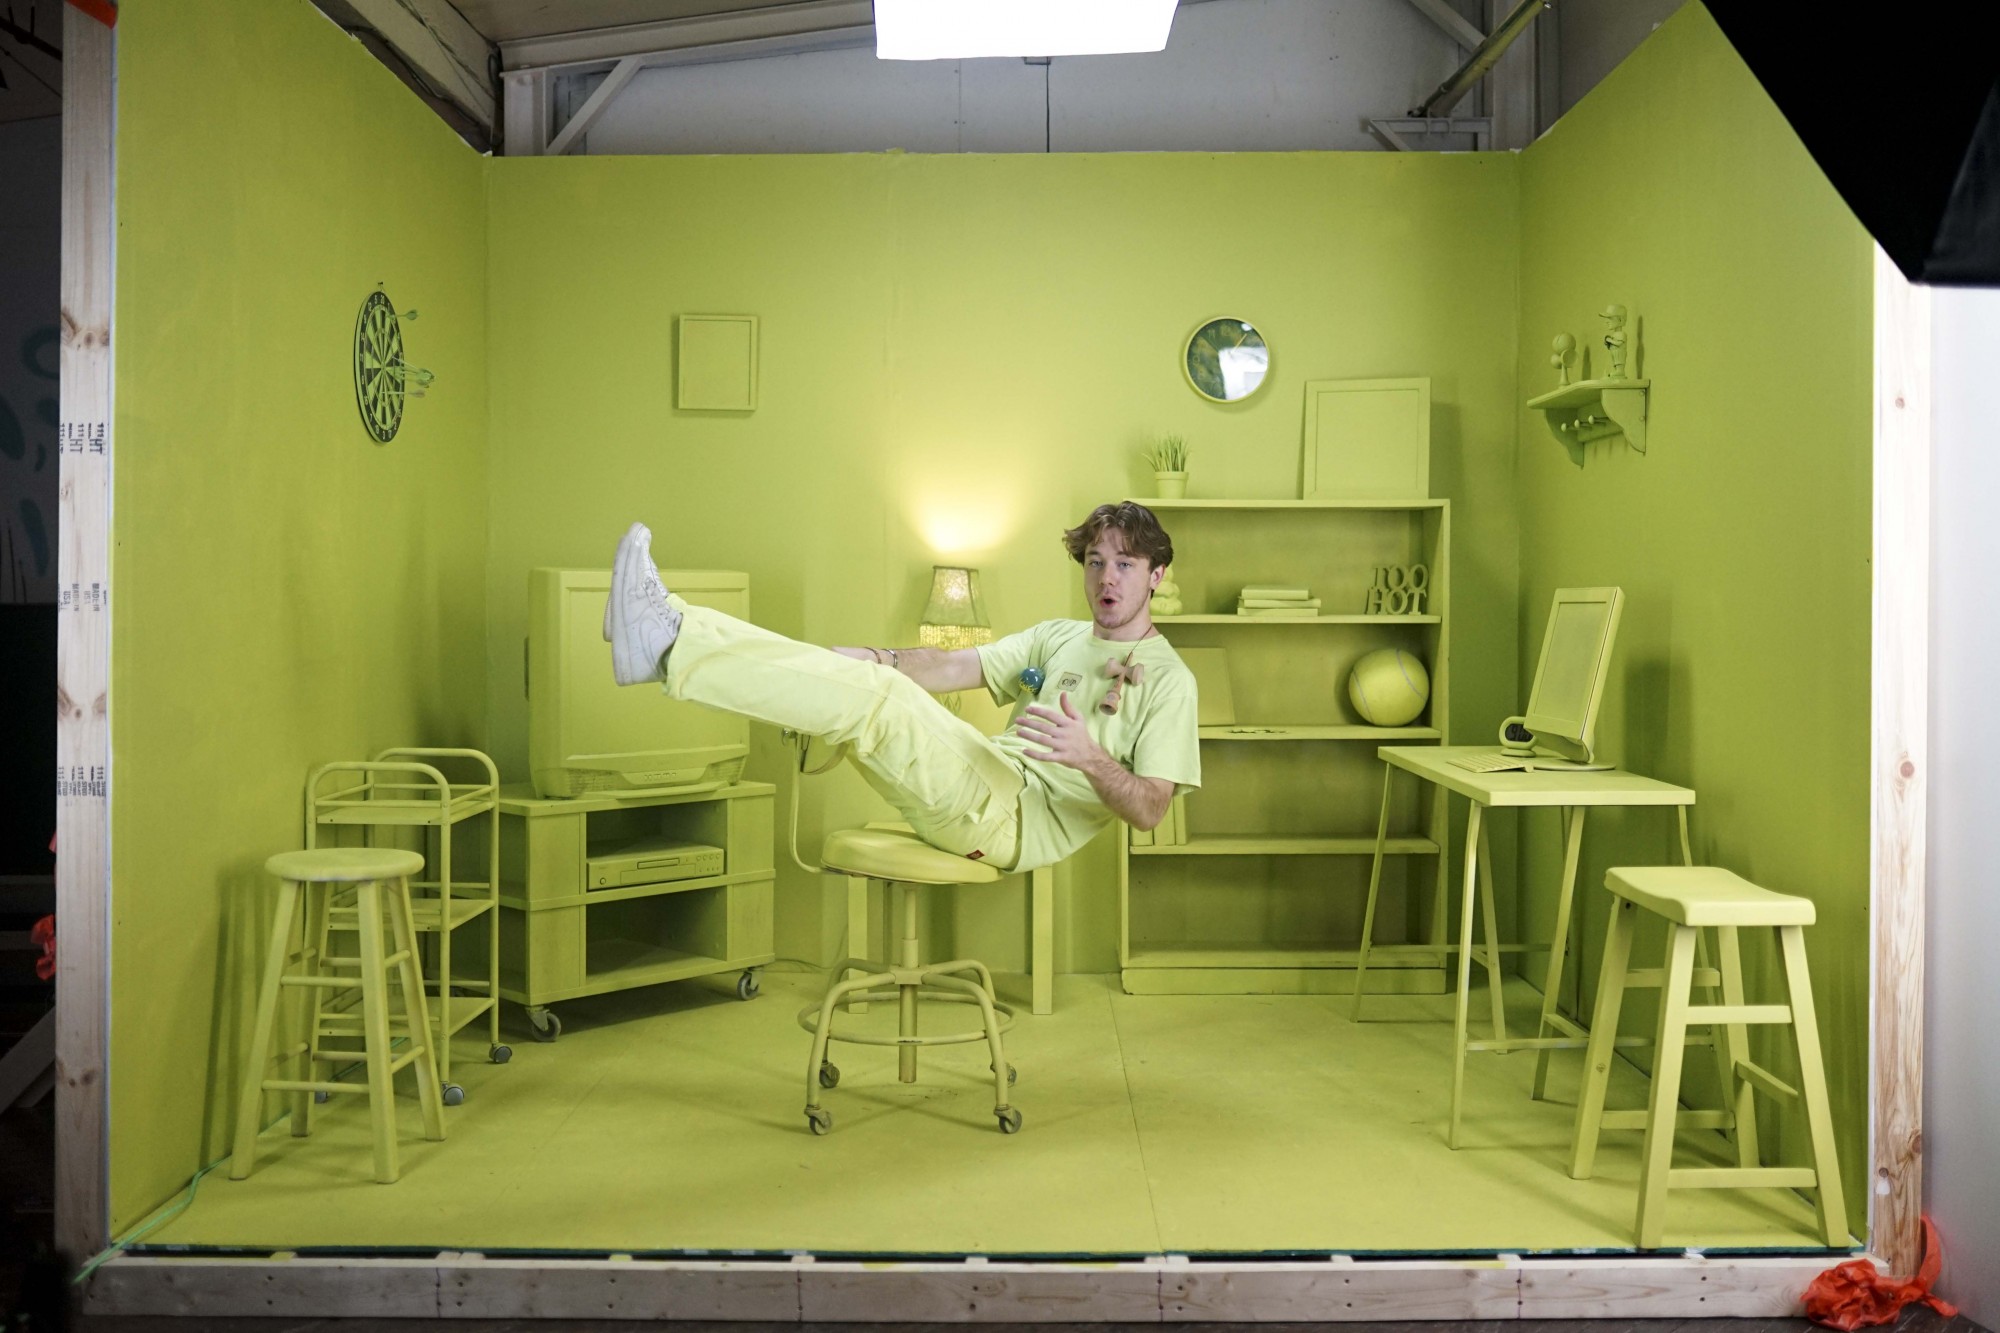 Eddy poses for a portrait in a custom built studio he designed to promote a new pro model Kendama on Monday, Nov. 18. A video he produced, Coop’s room, found inspiration from how common it is for many kids to play Kendama in their own room and the vibrant, green color of his new model. 